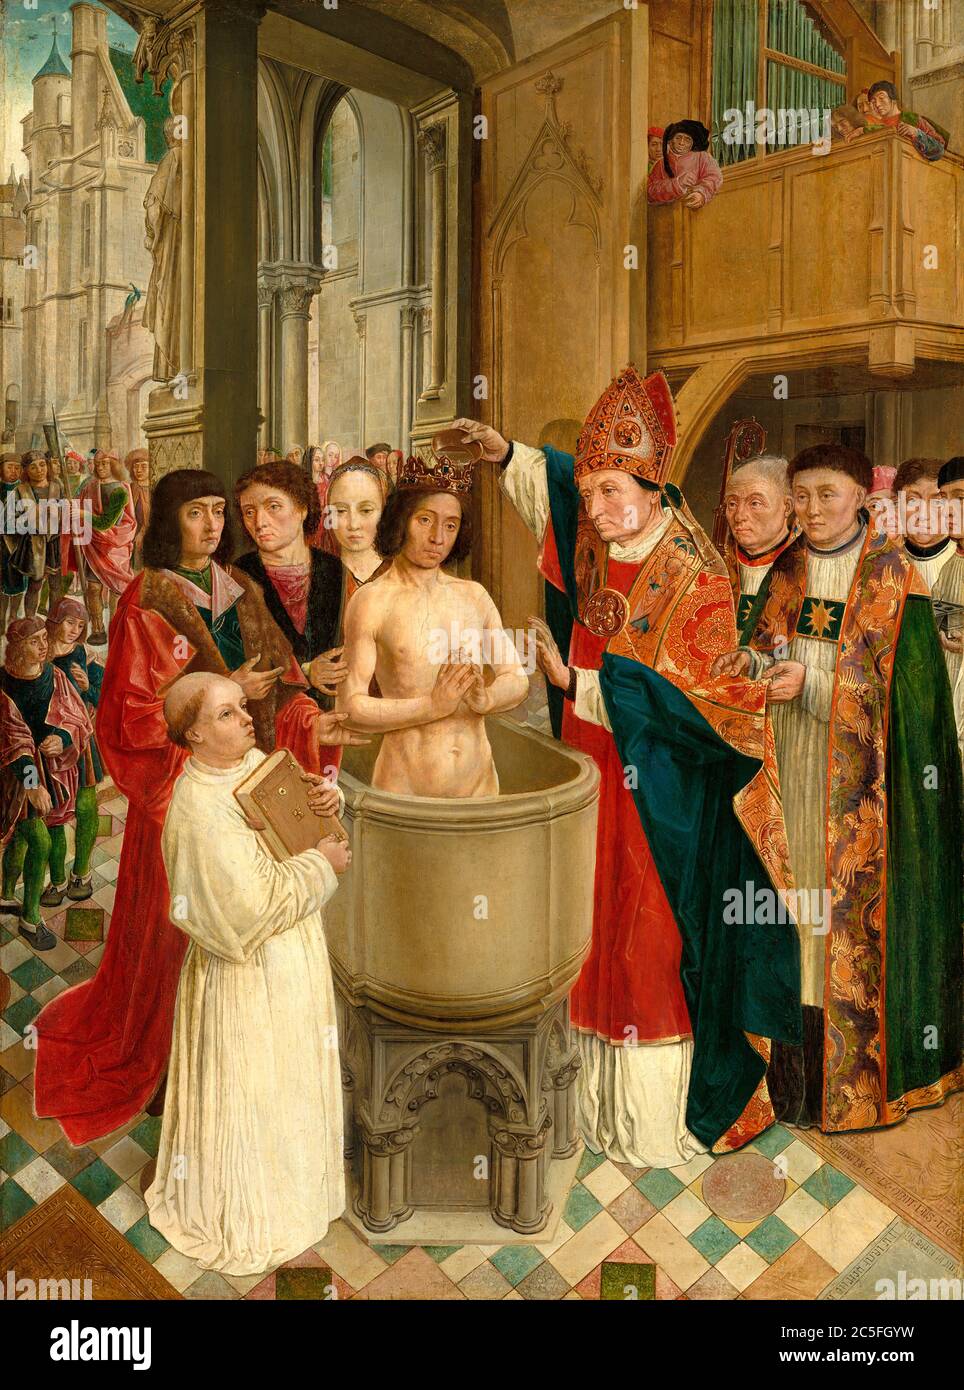 Saint Remigius, Remi, Rémi or Rémy (c. 437 – 533), Bishop of Reims and 'Apostle of the Franks'. On 25 December 496 he baptised Clovis I, King of the Franks. This baptism, leading to the conversion of the entire Frankish people to Christianity, was a momentous success for the Church and a seminal event in European history. Saint Remigius baptizes Clovis I, by the Master of Saint Gilles, Stock Photo